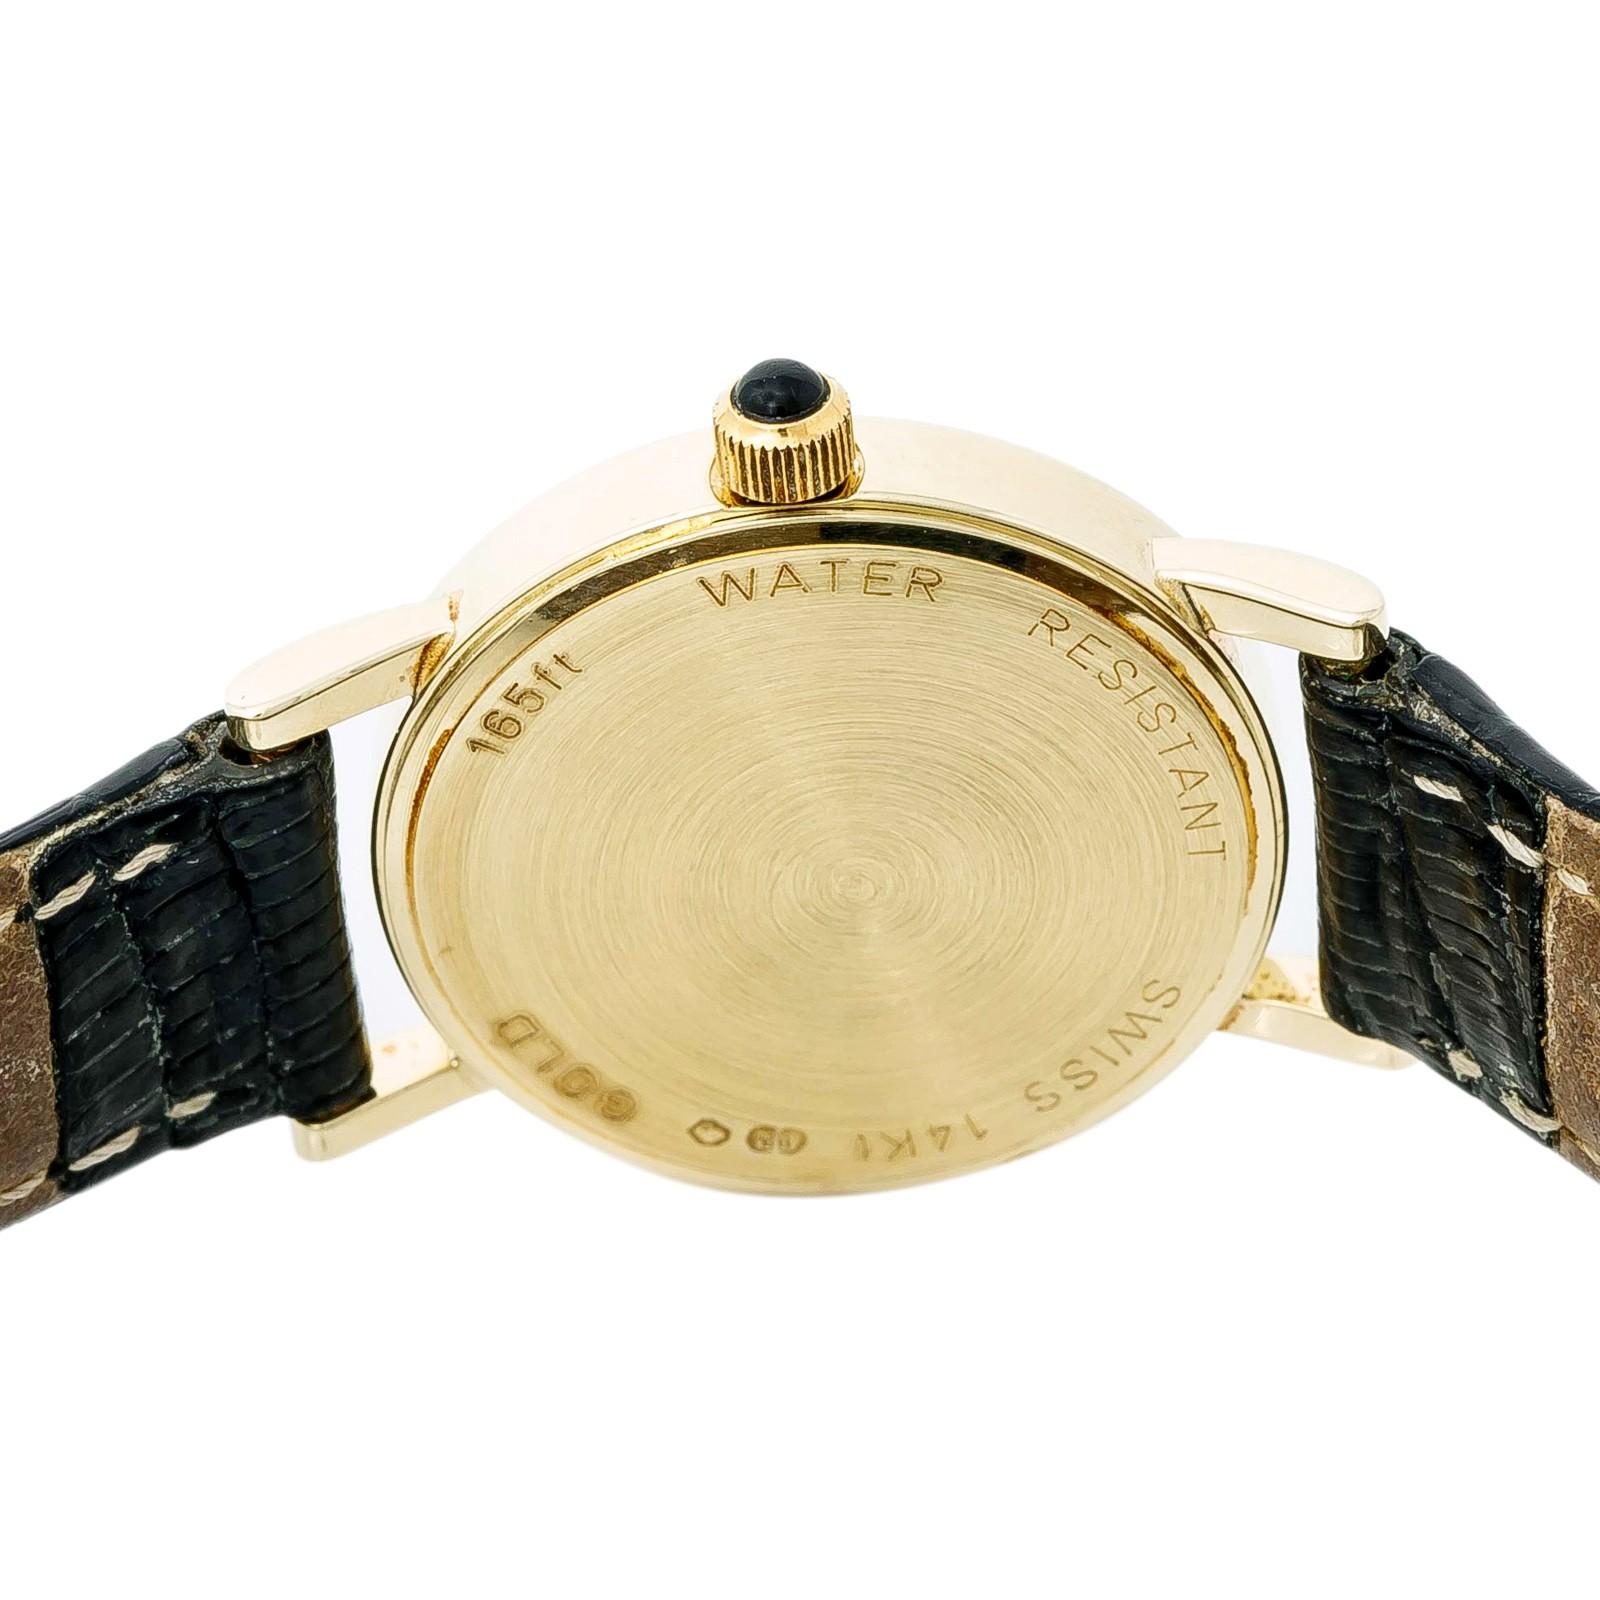 Tourneau Unknown Reference #:Unknown. Tourneau Womens Quartz Watch White Dial 18K Yellow Gold Leather Band 23mm. Verified and Certified by WatchFacts. 1 year warranty offered by WatchFacts.
